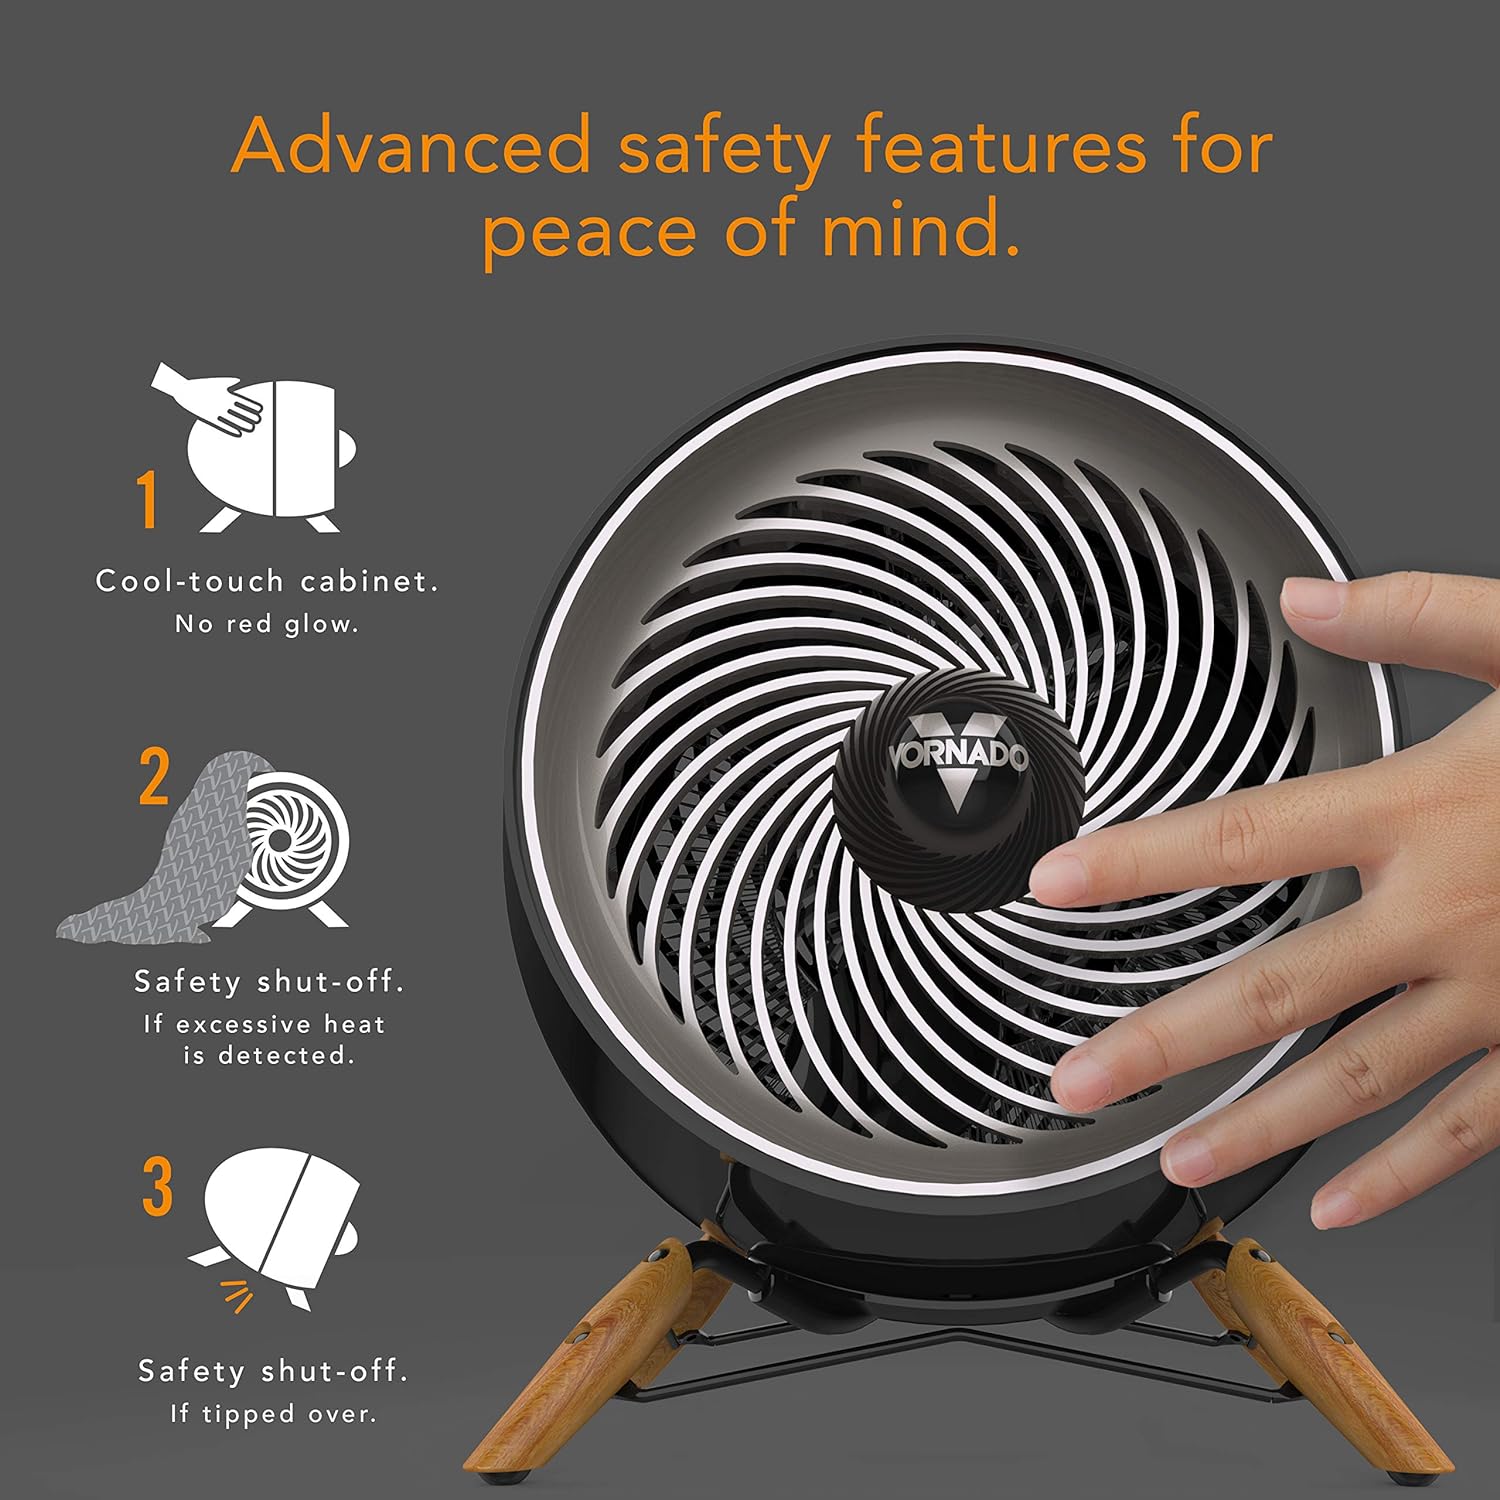 Vornado Pivot Heat Electric Space Heater with 20-Degrees of Tilt, Adjustable Thermostat, Advanced Safety Features, for Home and Office, White